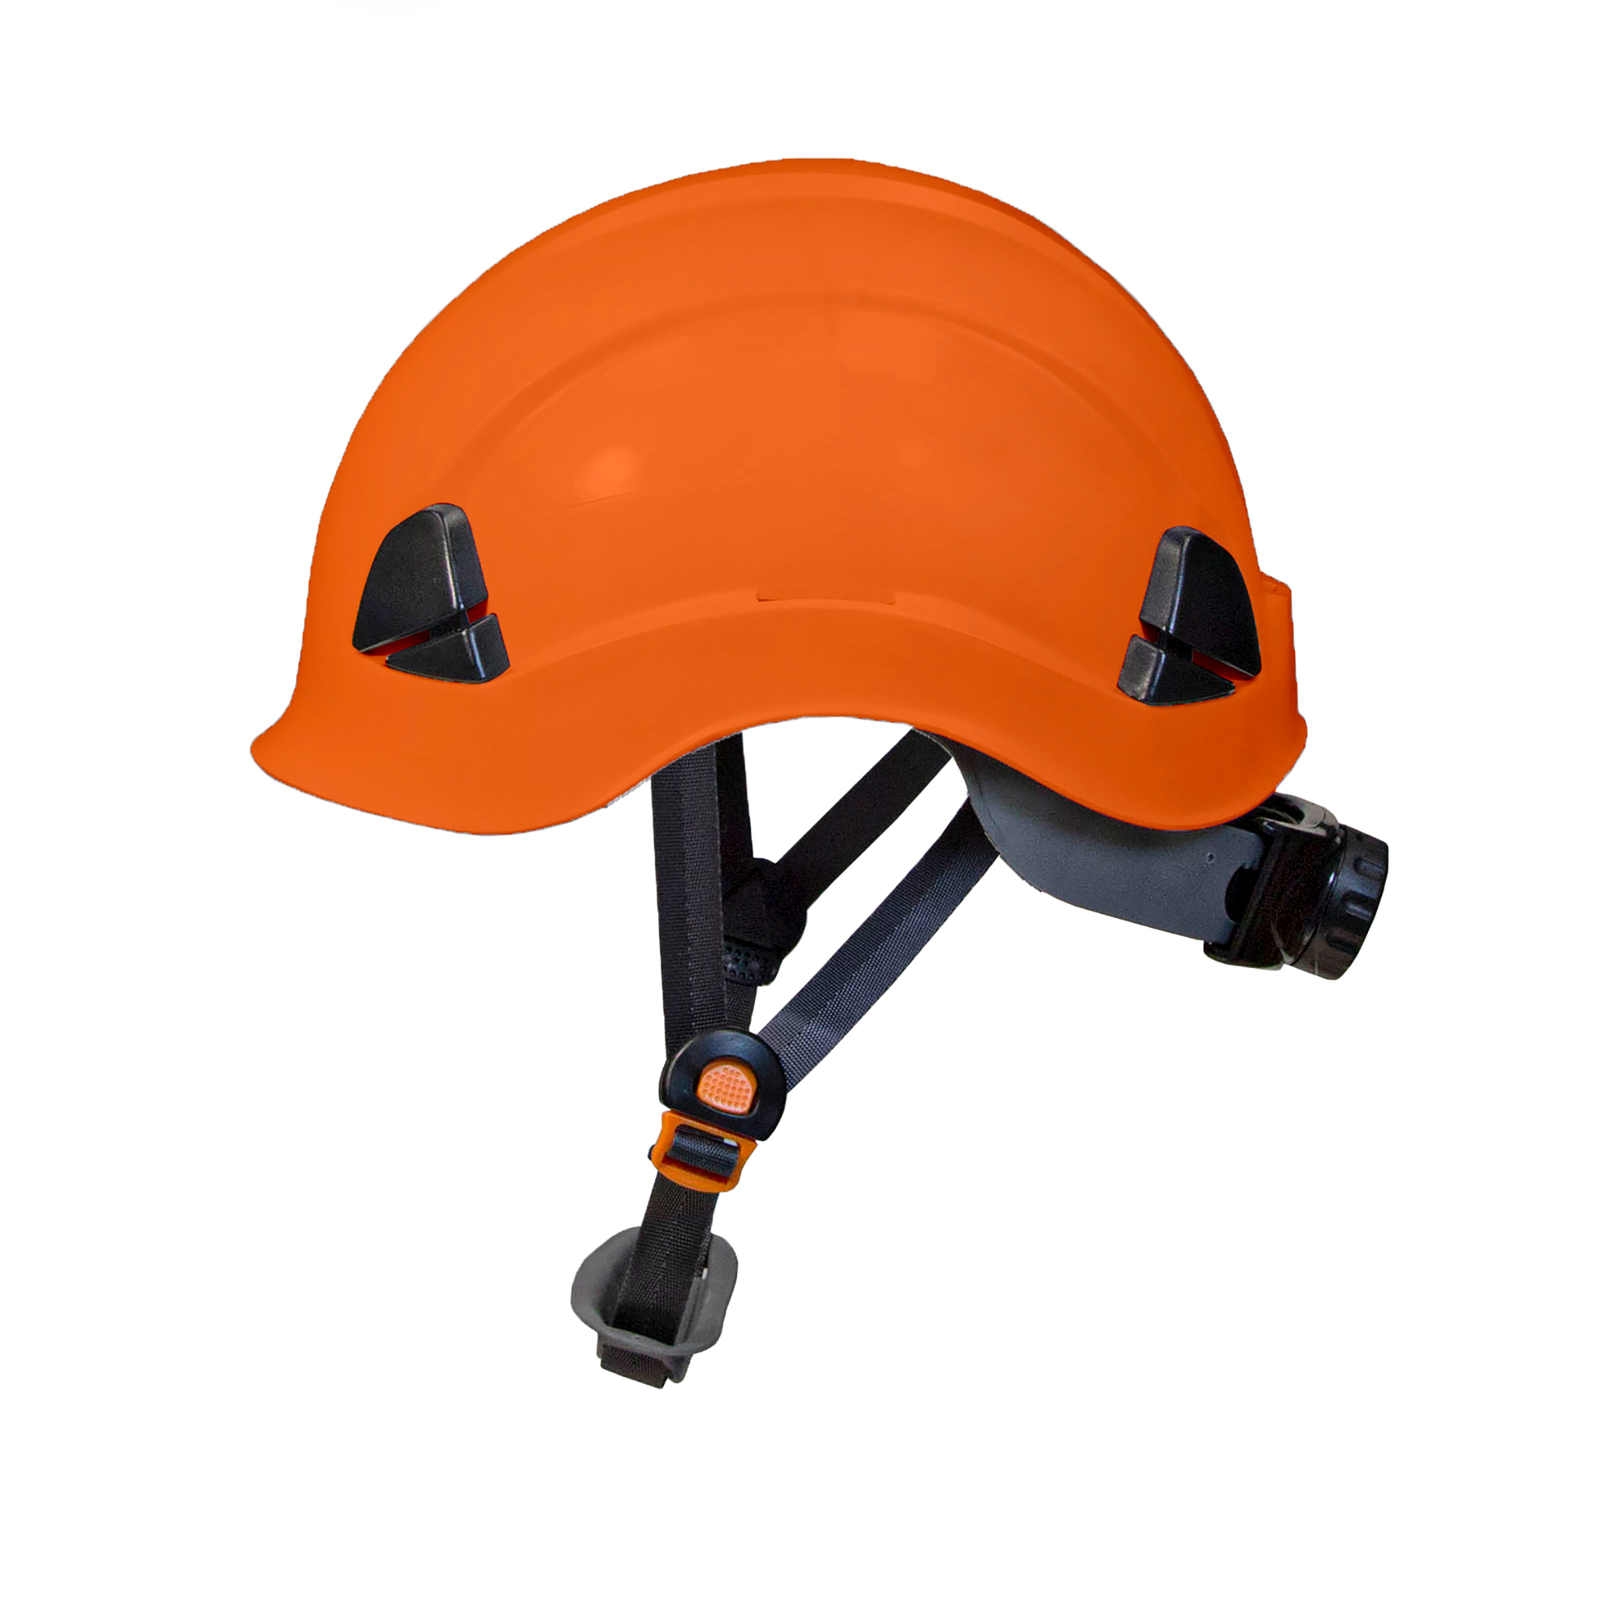 Side view image of the Jorestech orange mountable helmet without the attachments